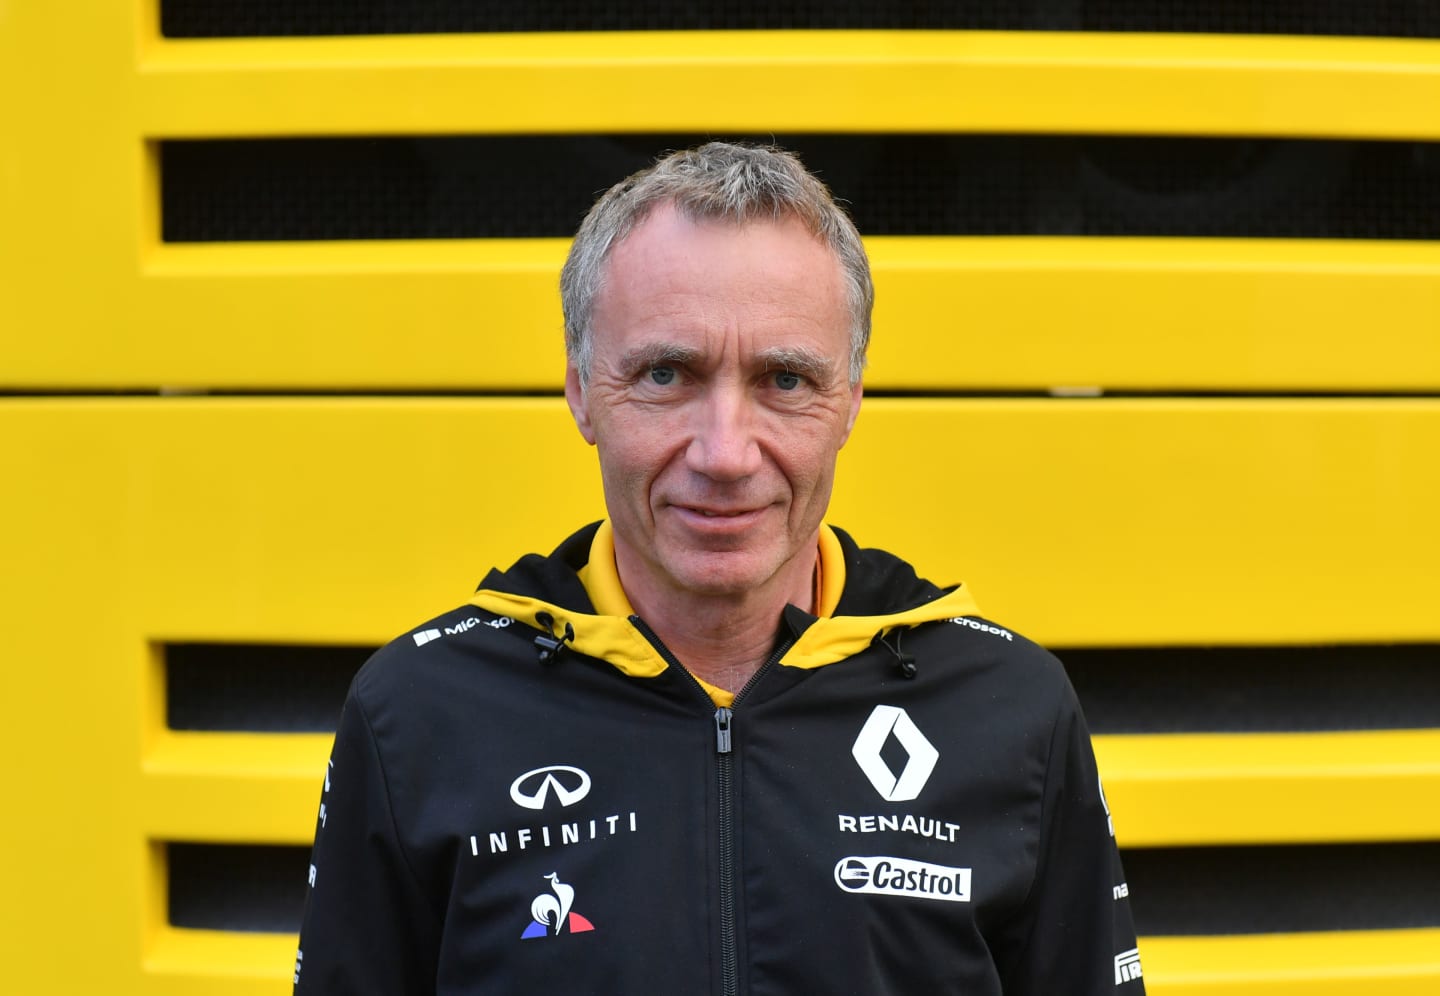 Renault Sport F1 Team Chief Technical Officer Bob Bell poses for pictures at the Spa-Francorchamps